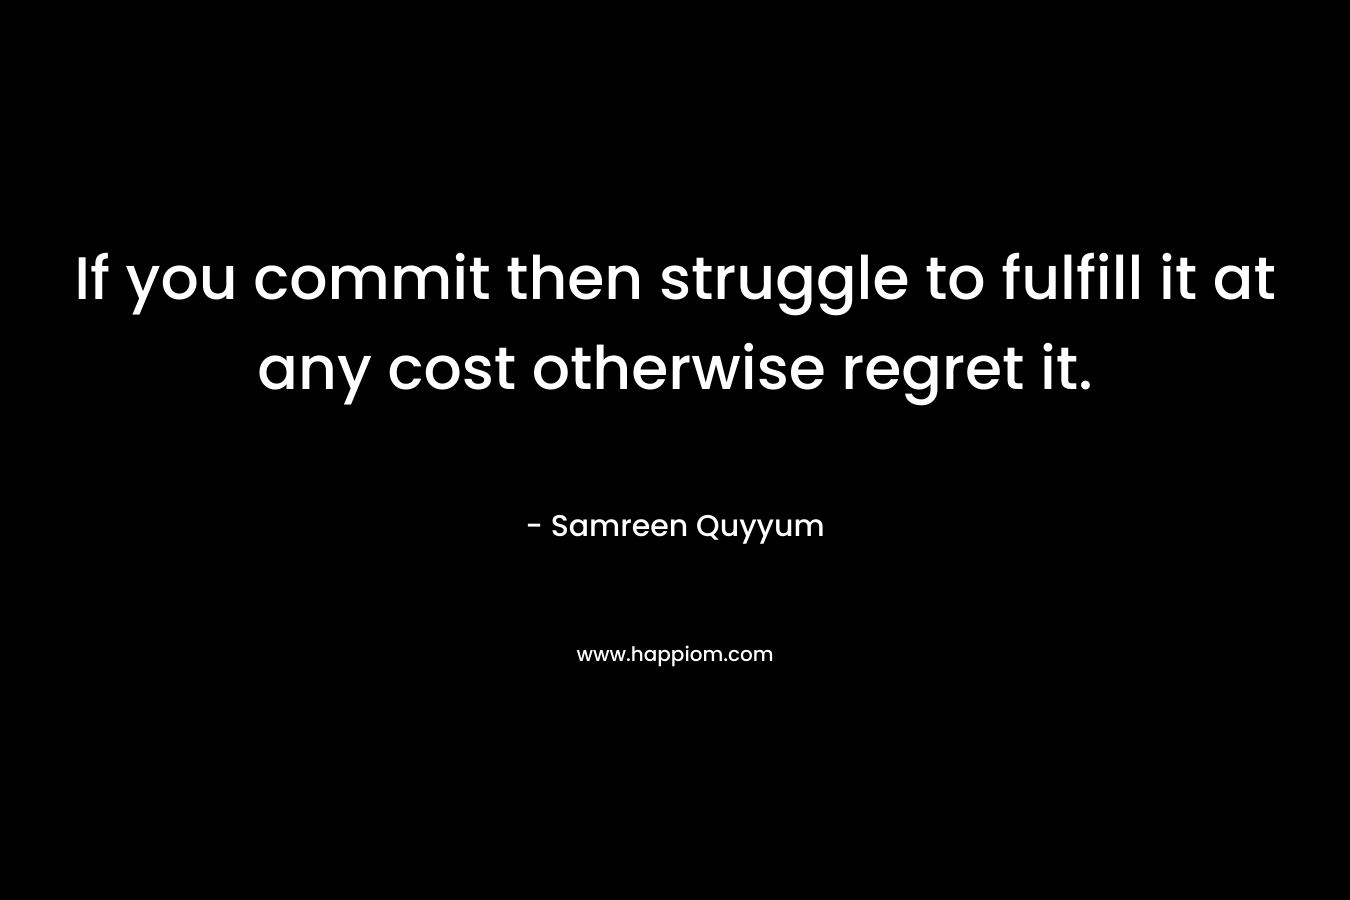 If you commit then struggle to fulfill it at any cost otherwise regret it. – Samreen Quyyum